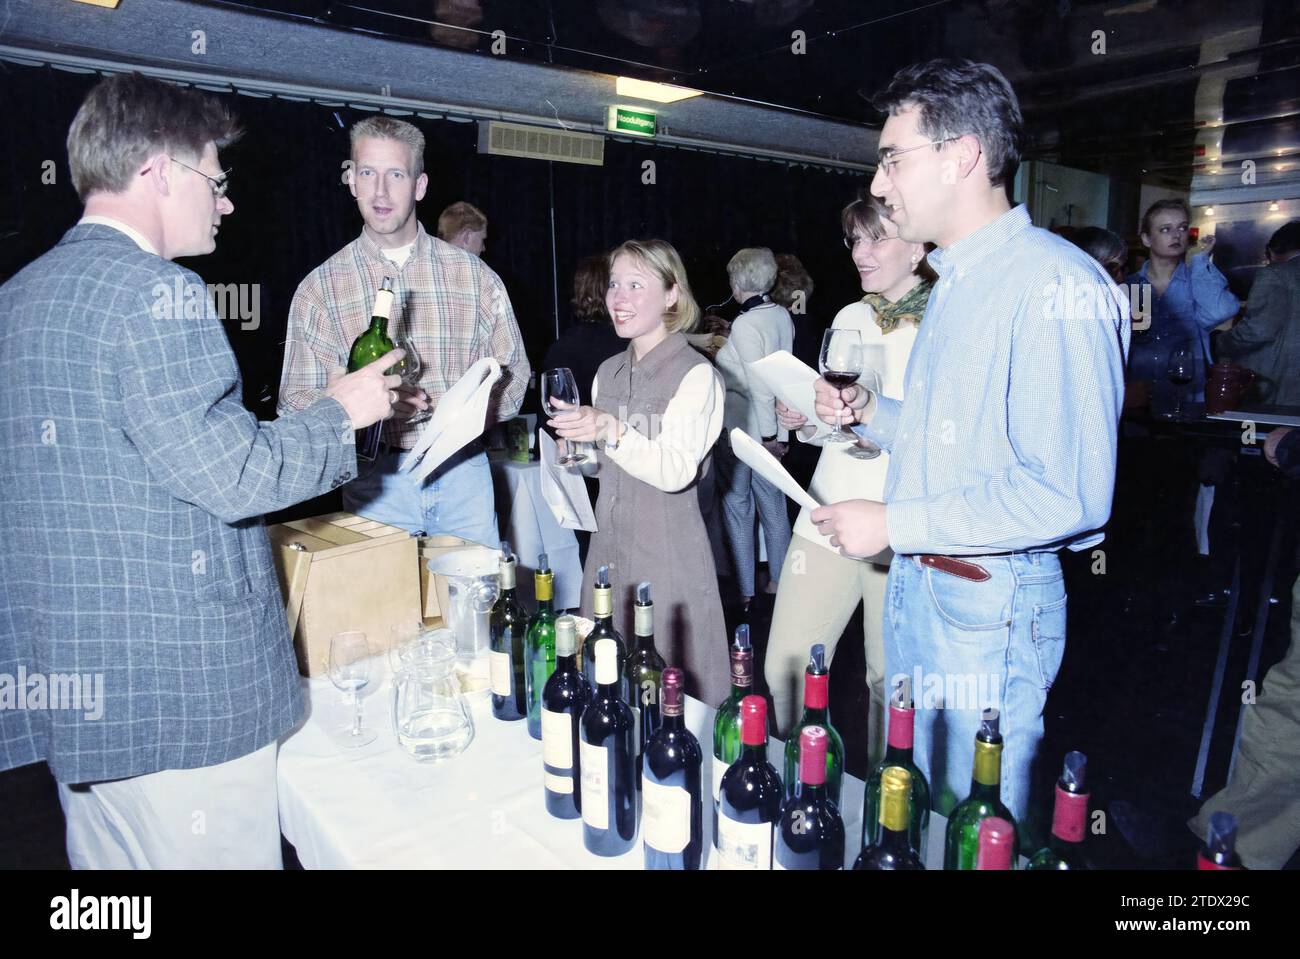 Wine tasting, fa. Bacchus Concertgebouw, 25-05-1997, Whizgle News from the Past, Tailored for the Future. Explore historical narratives, Dutch The Netherlands agency image with a modern perspective, bridging the gap between yesterday's events and tomorrow's insights. A timeless journey shaping the stories that shape our future Stock Photo